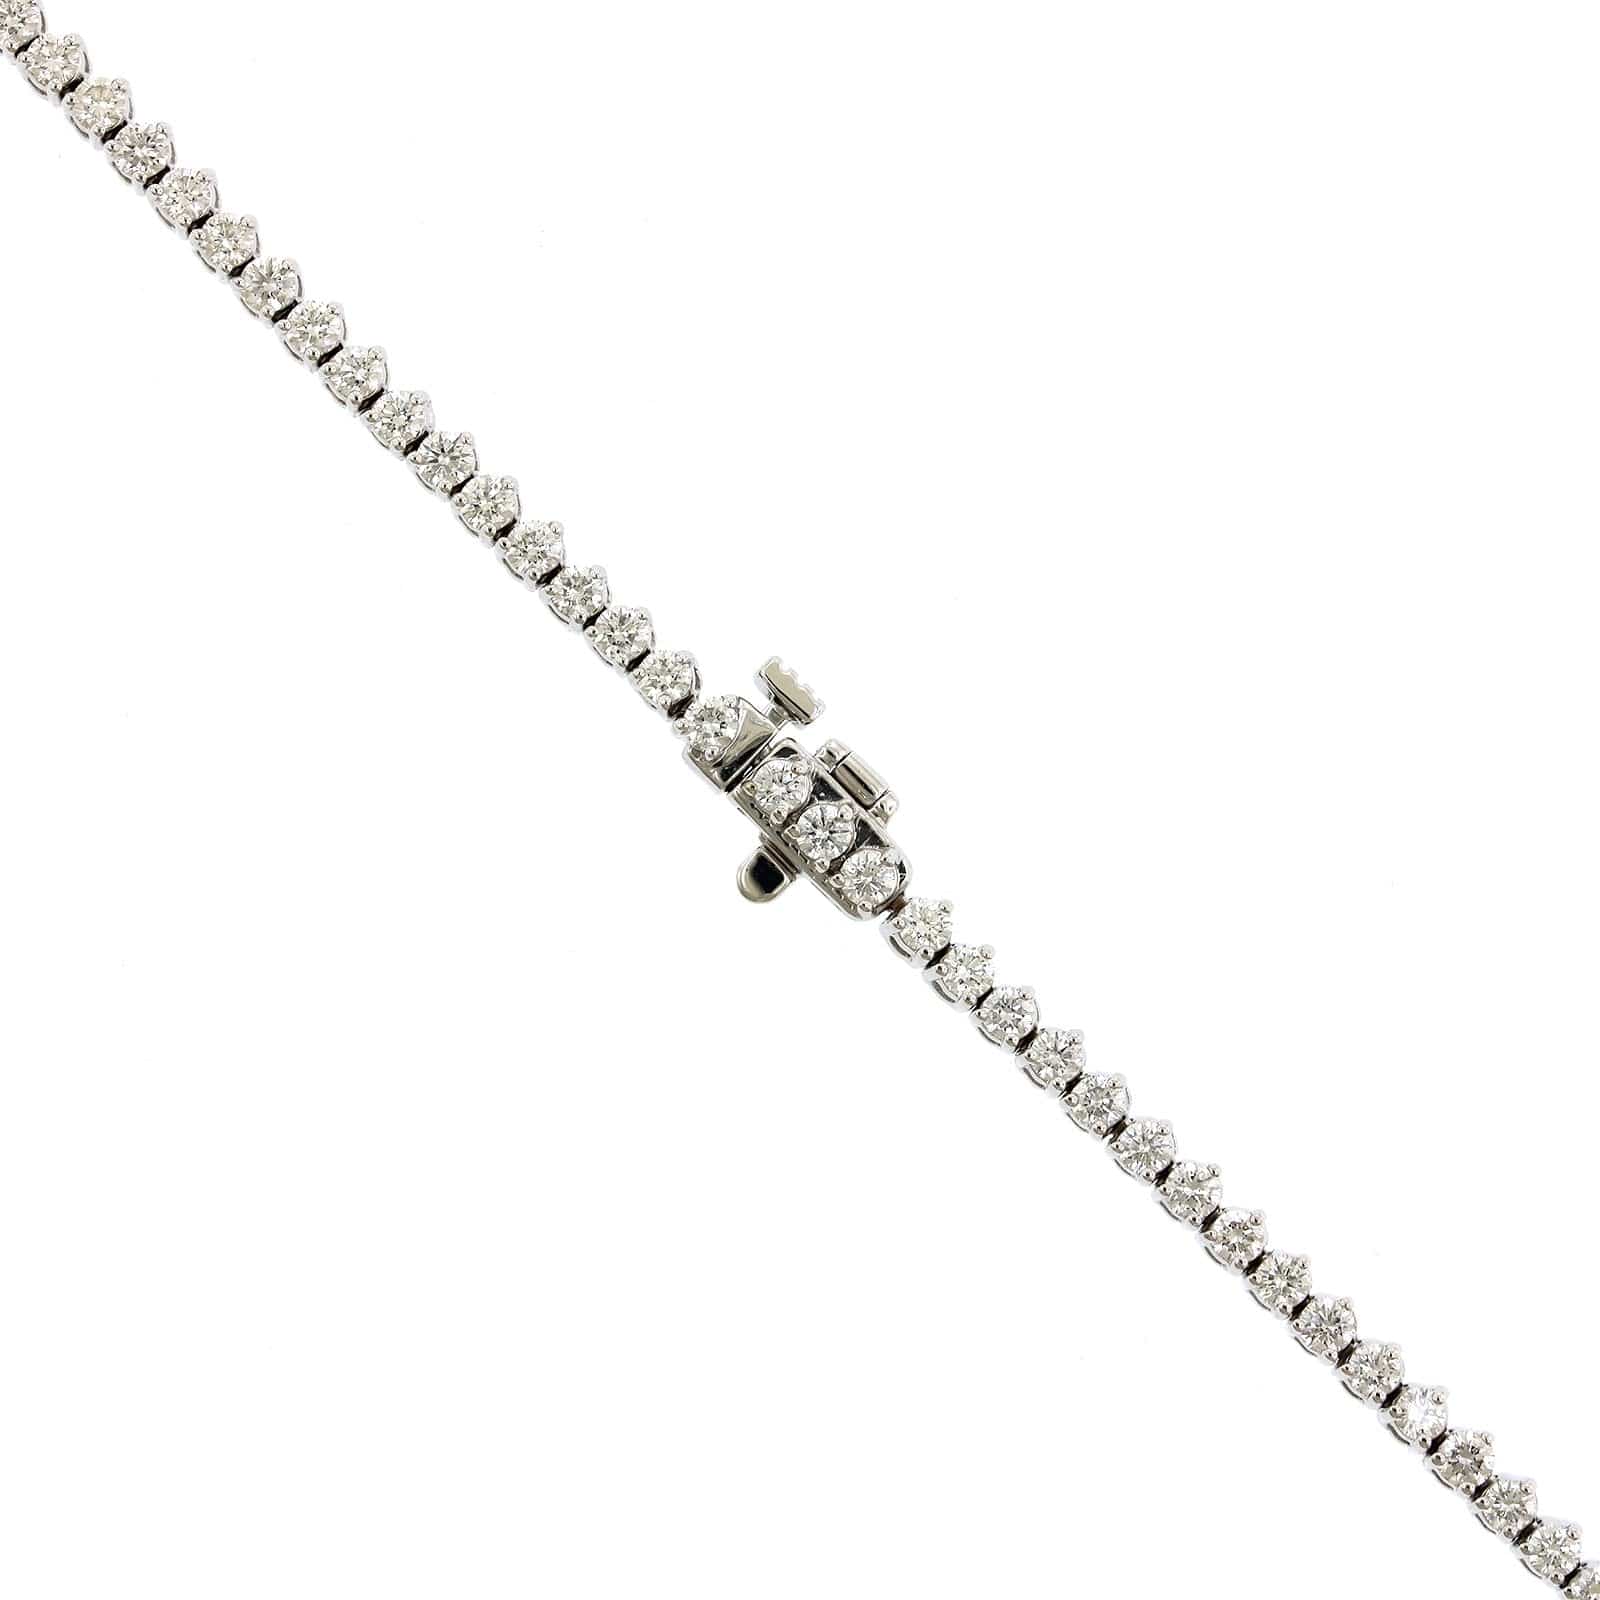 18K White Gold Graduated Diamond Tennis Necklace, White Gold, Long's Jewelers